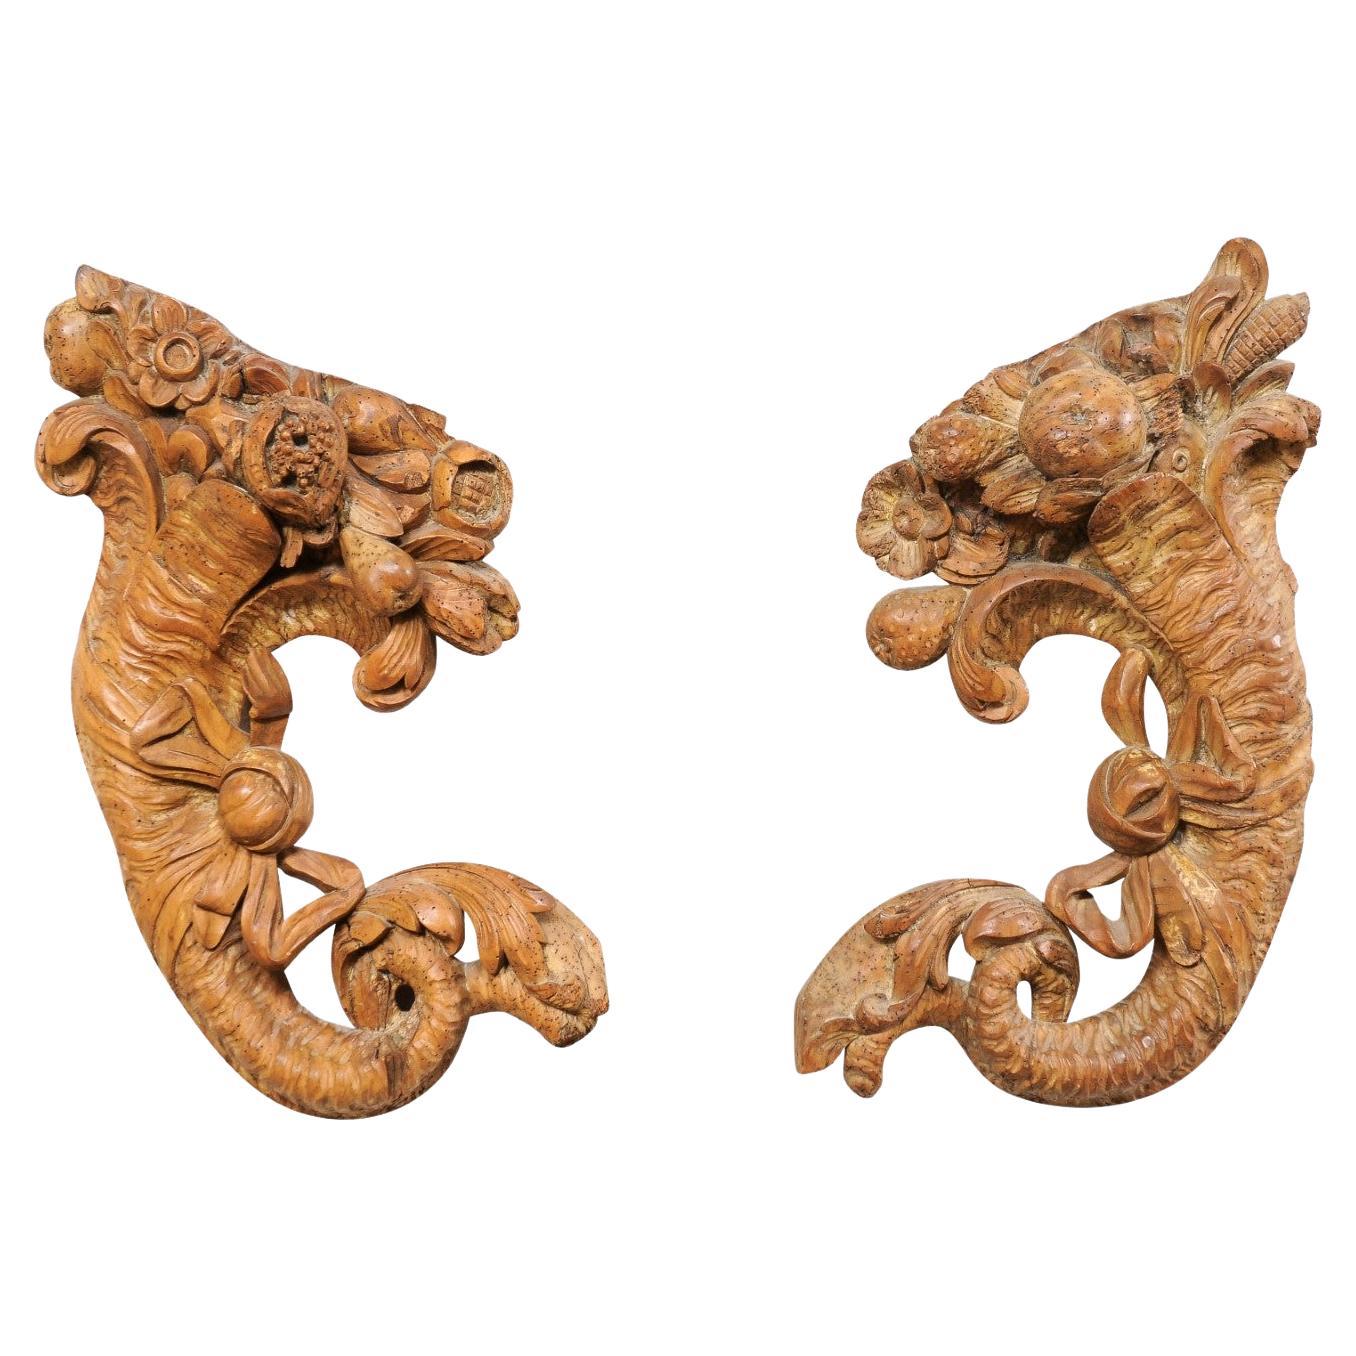 French Pair of Carved-Wood Cornucopia Wall Plaques, Turn of the 18th and 19th C.